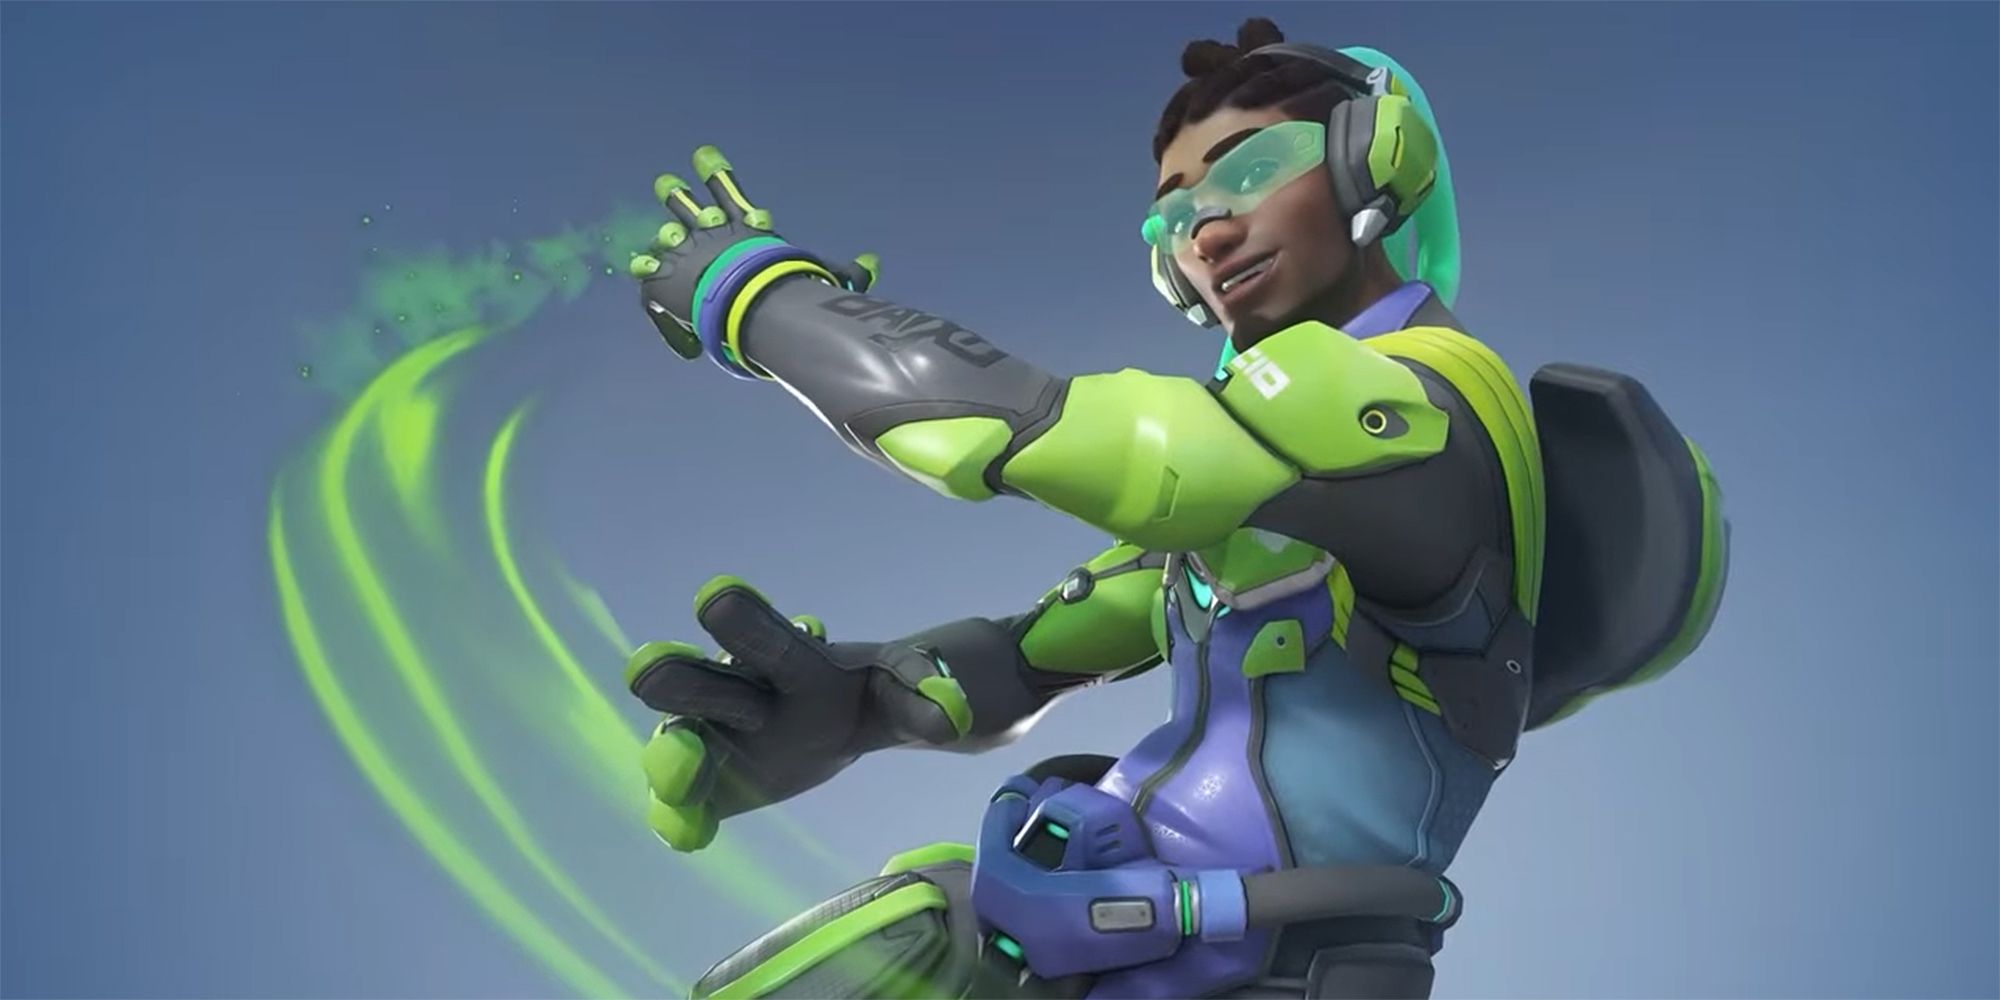 lucio changing songs with crossfade in highlight intro